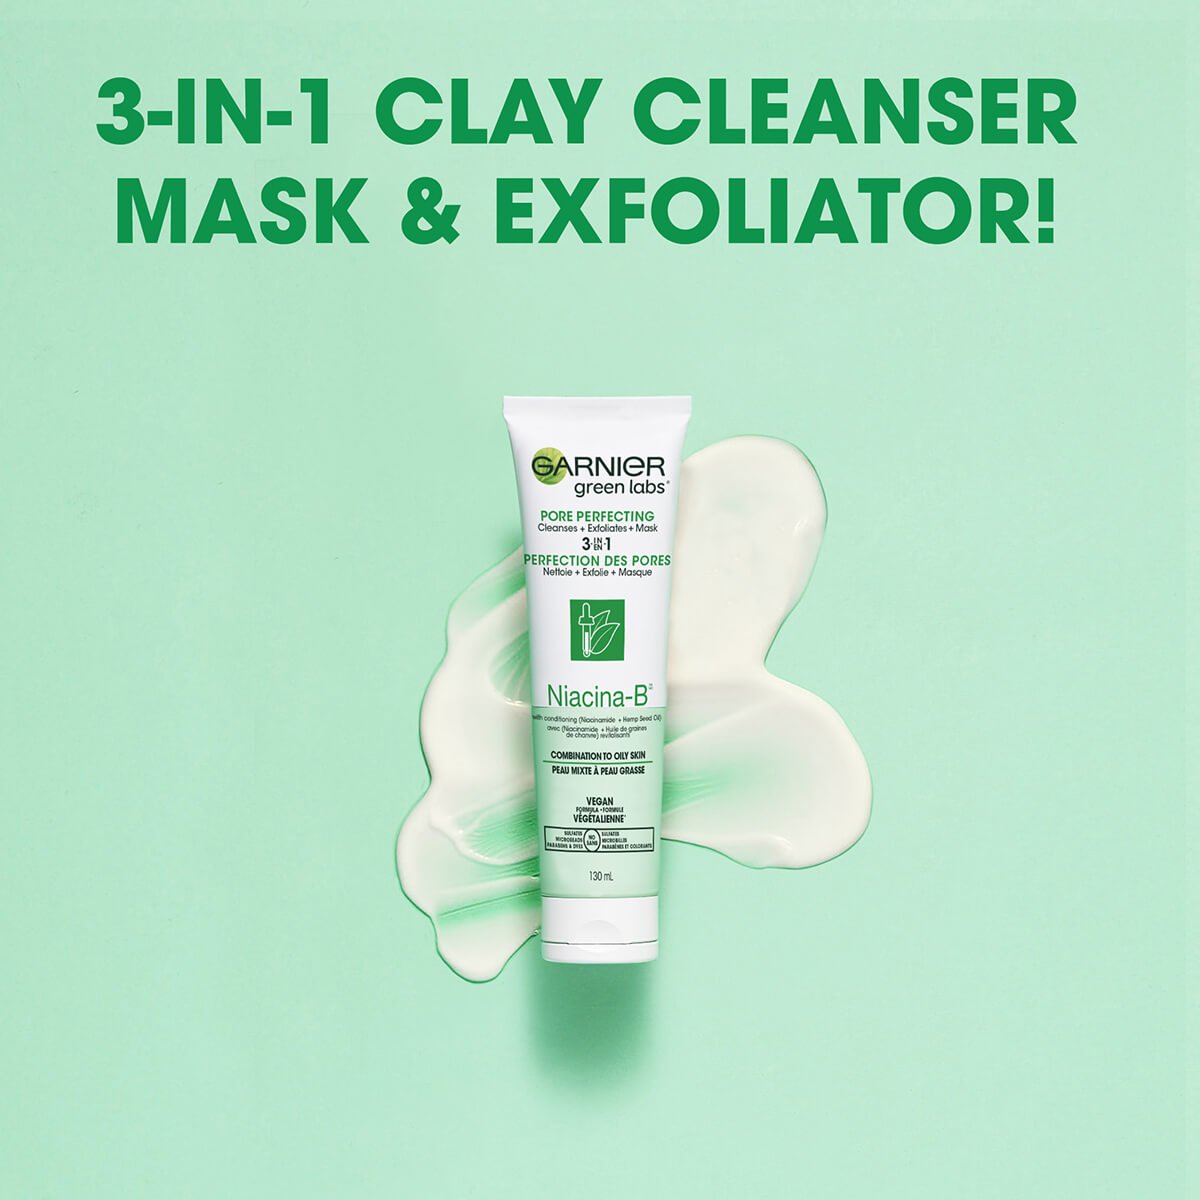 Green labs cleanser niacinamide IMAGE2